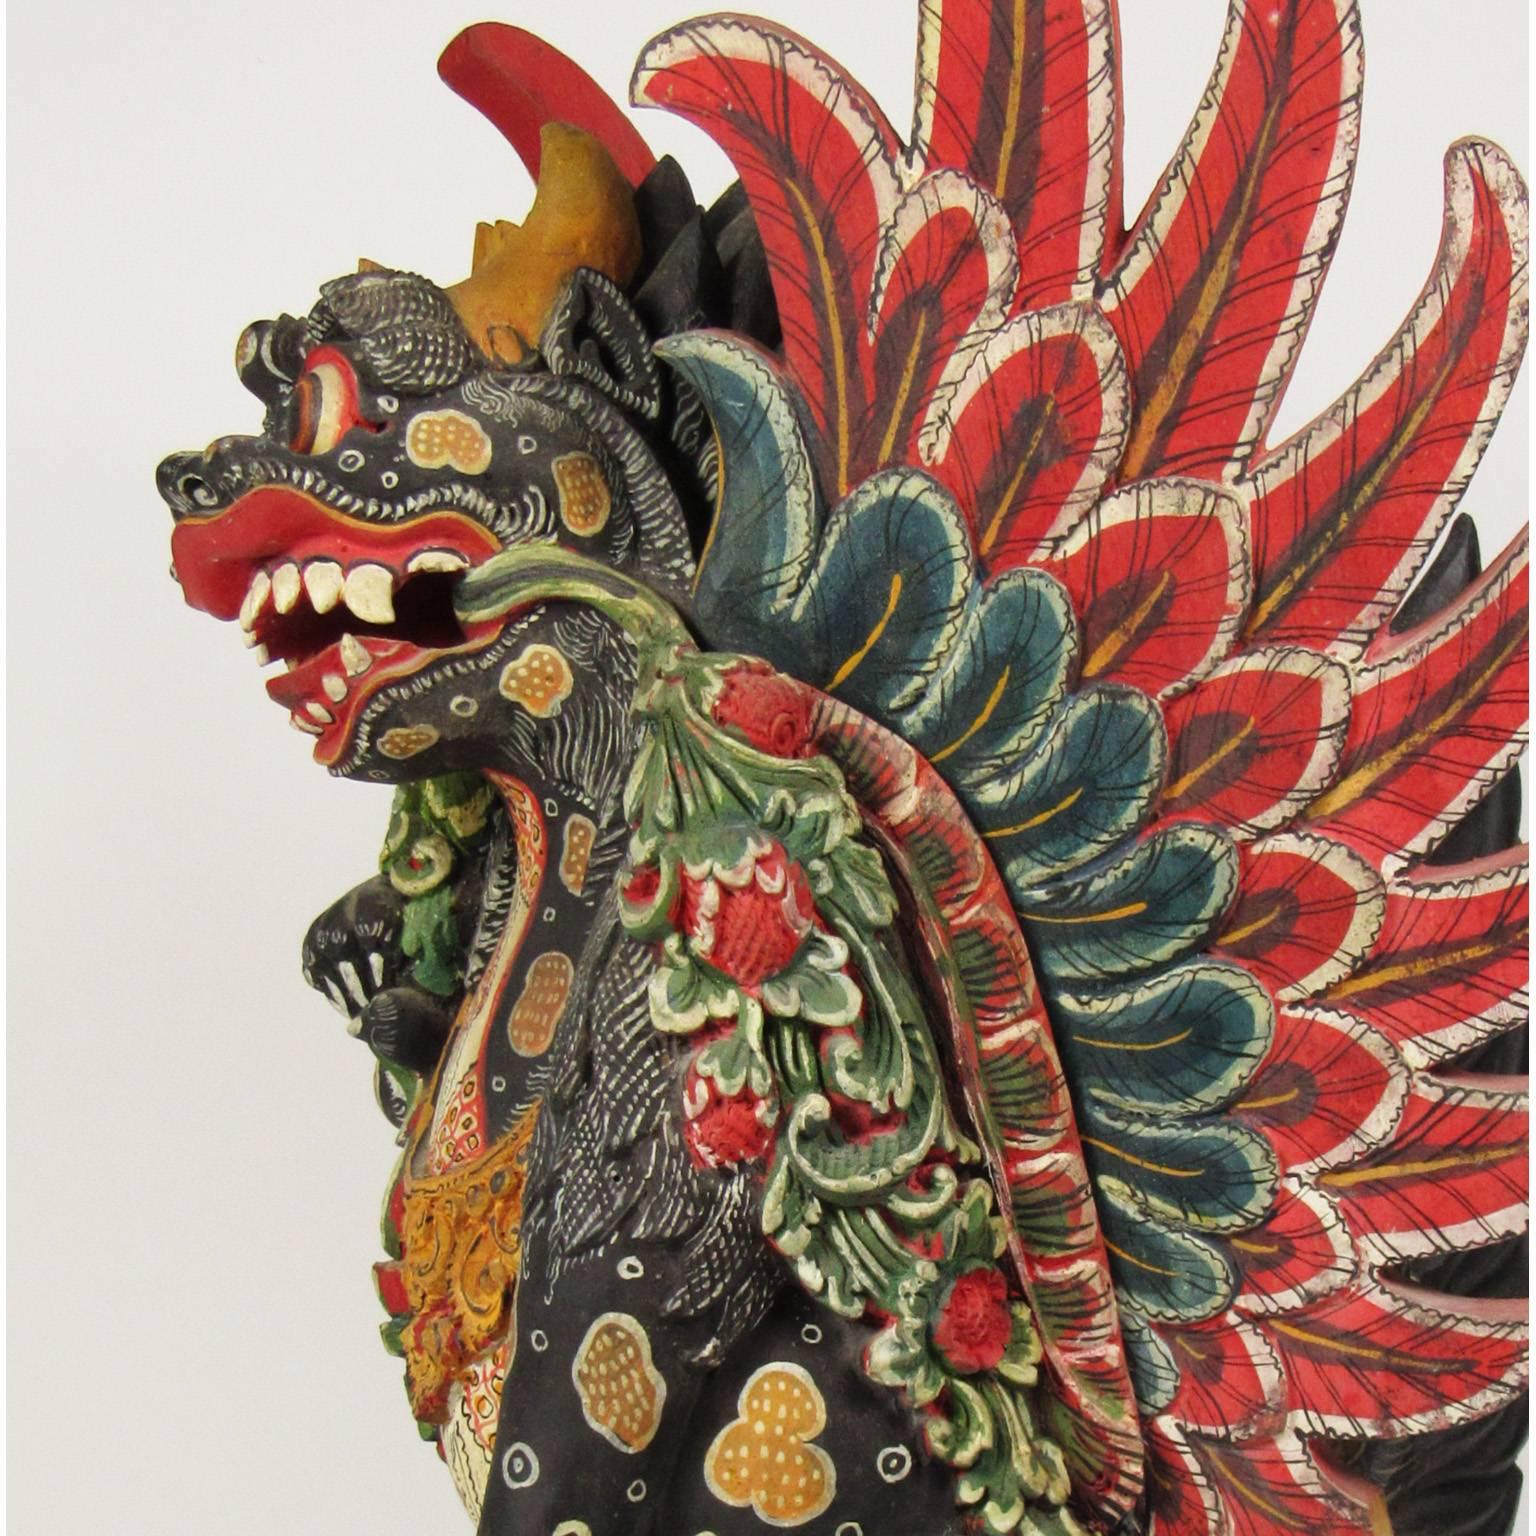 Antique early 20th century Balinese carved and polychromed wood figure of a winged lion, also known as a Singa. Singa's often serve as guardians of temples in Southeast Asia. Dimensions: 20 x 10 x 12 inches.